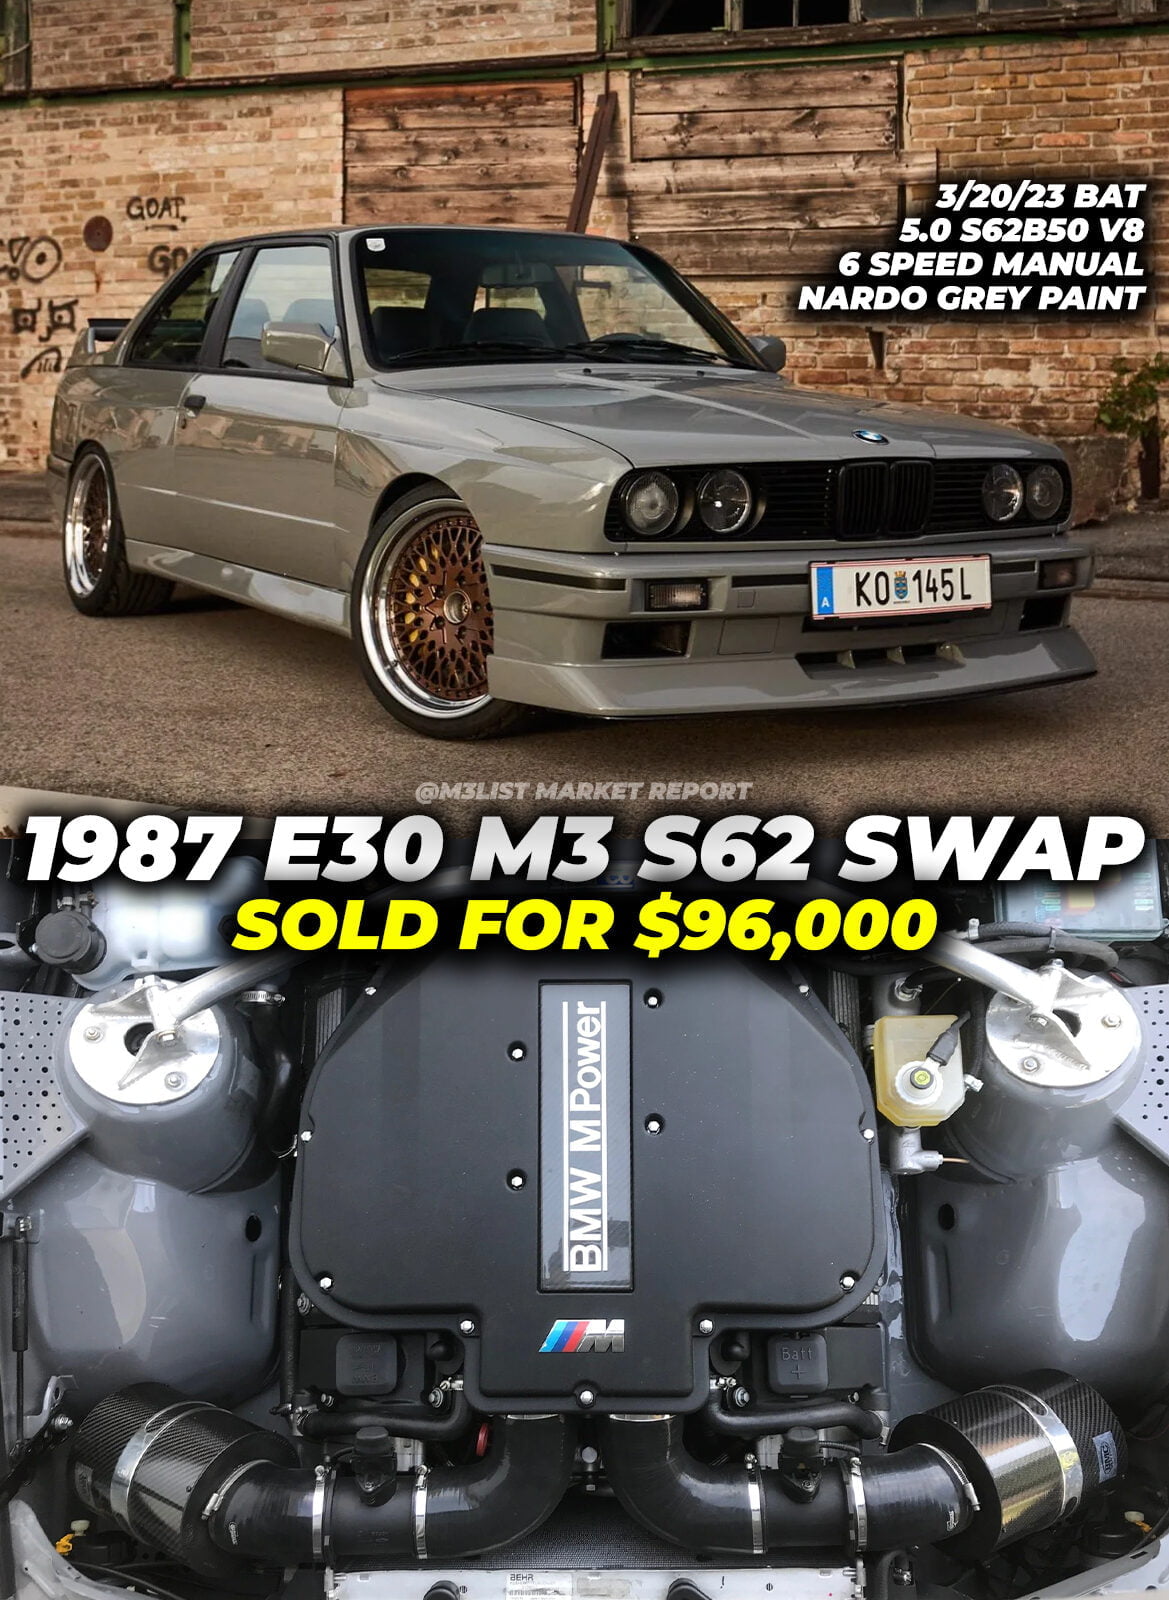 S62 swapped 1987 BMW E30 M3 sold for $96,000! Painted Nardo Grey 6 speed. M3List Market Report